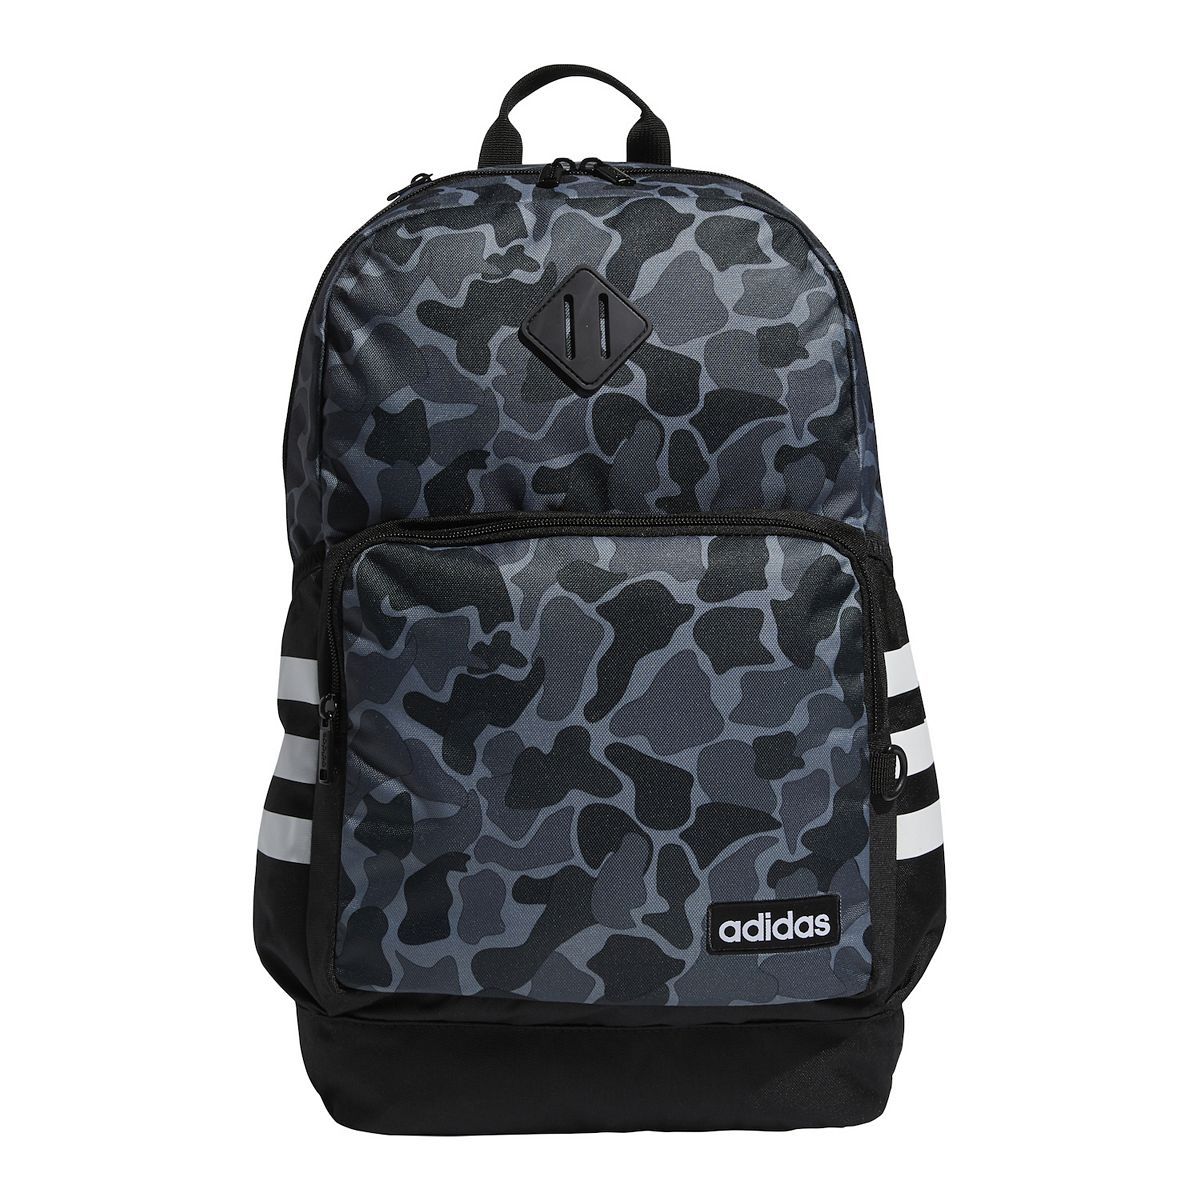 adidas Classic 3S 4 Backpack | Kohl's